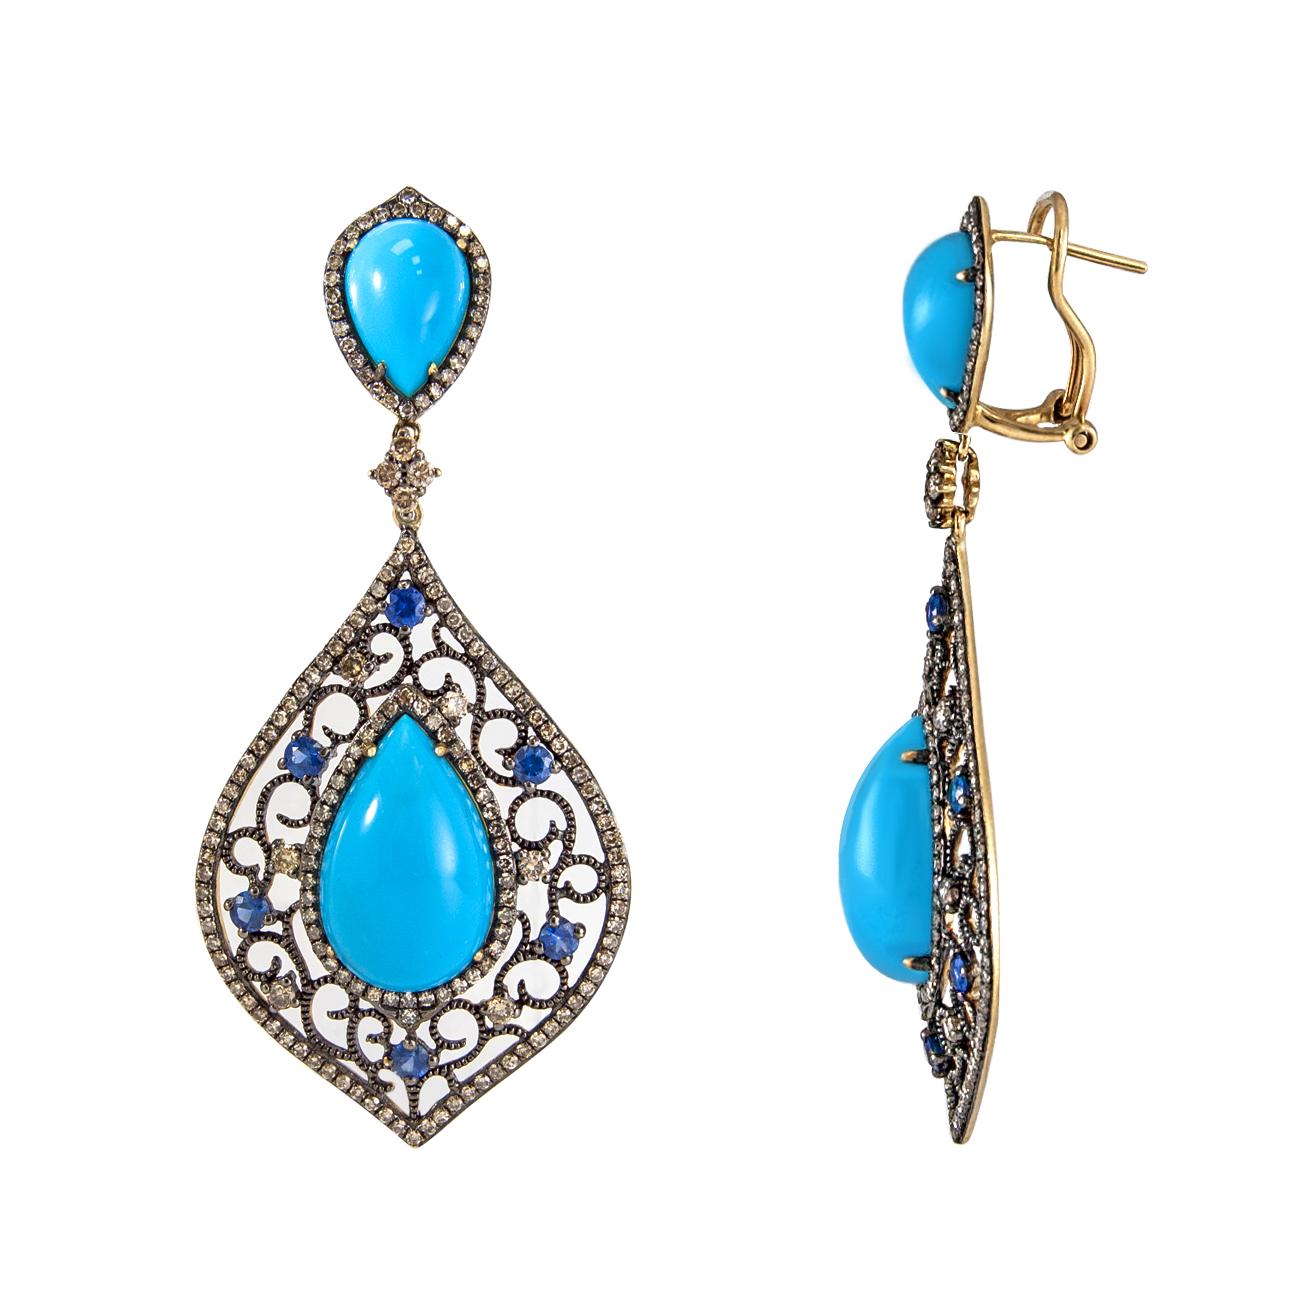 Glamorous and elegant dangle drop earrings hand crafted with pear shape turquoises (18.75 carats) light blue sapphires (1.20 carats) and champagne color diamonds (2.30 carats)  with black rhodium plating over 14 karat yellow gold to create these